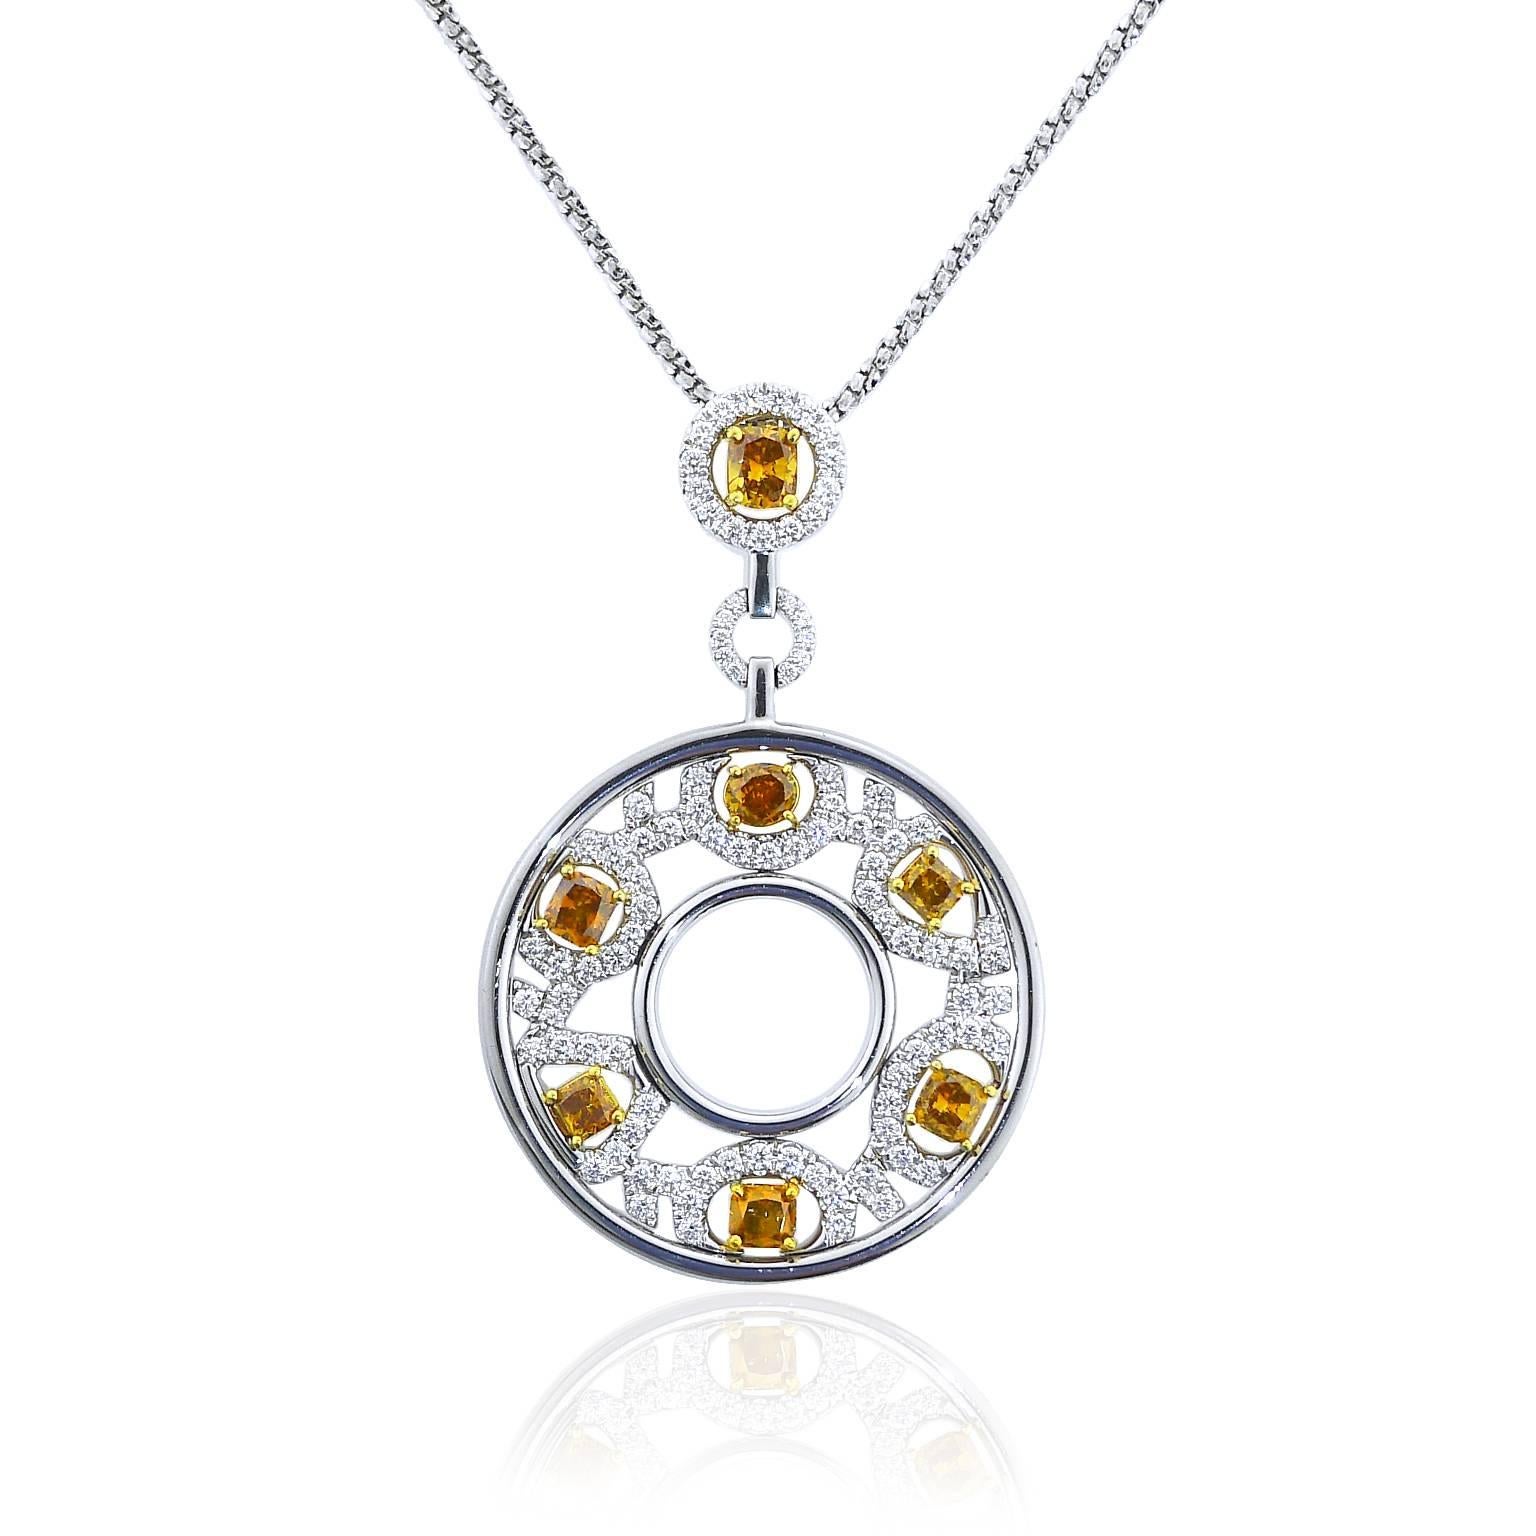 This 18 karat white gold bold and exciting necklace features 7 natural fancy color diamonds that total 3.27 carats and 96 round brilliant cut white diamonds that total 1.36 carats. Fancy diamonds are VS to SI clarity and white diamonds are F color,